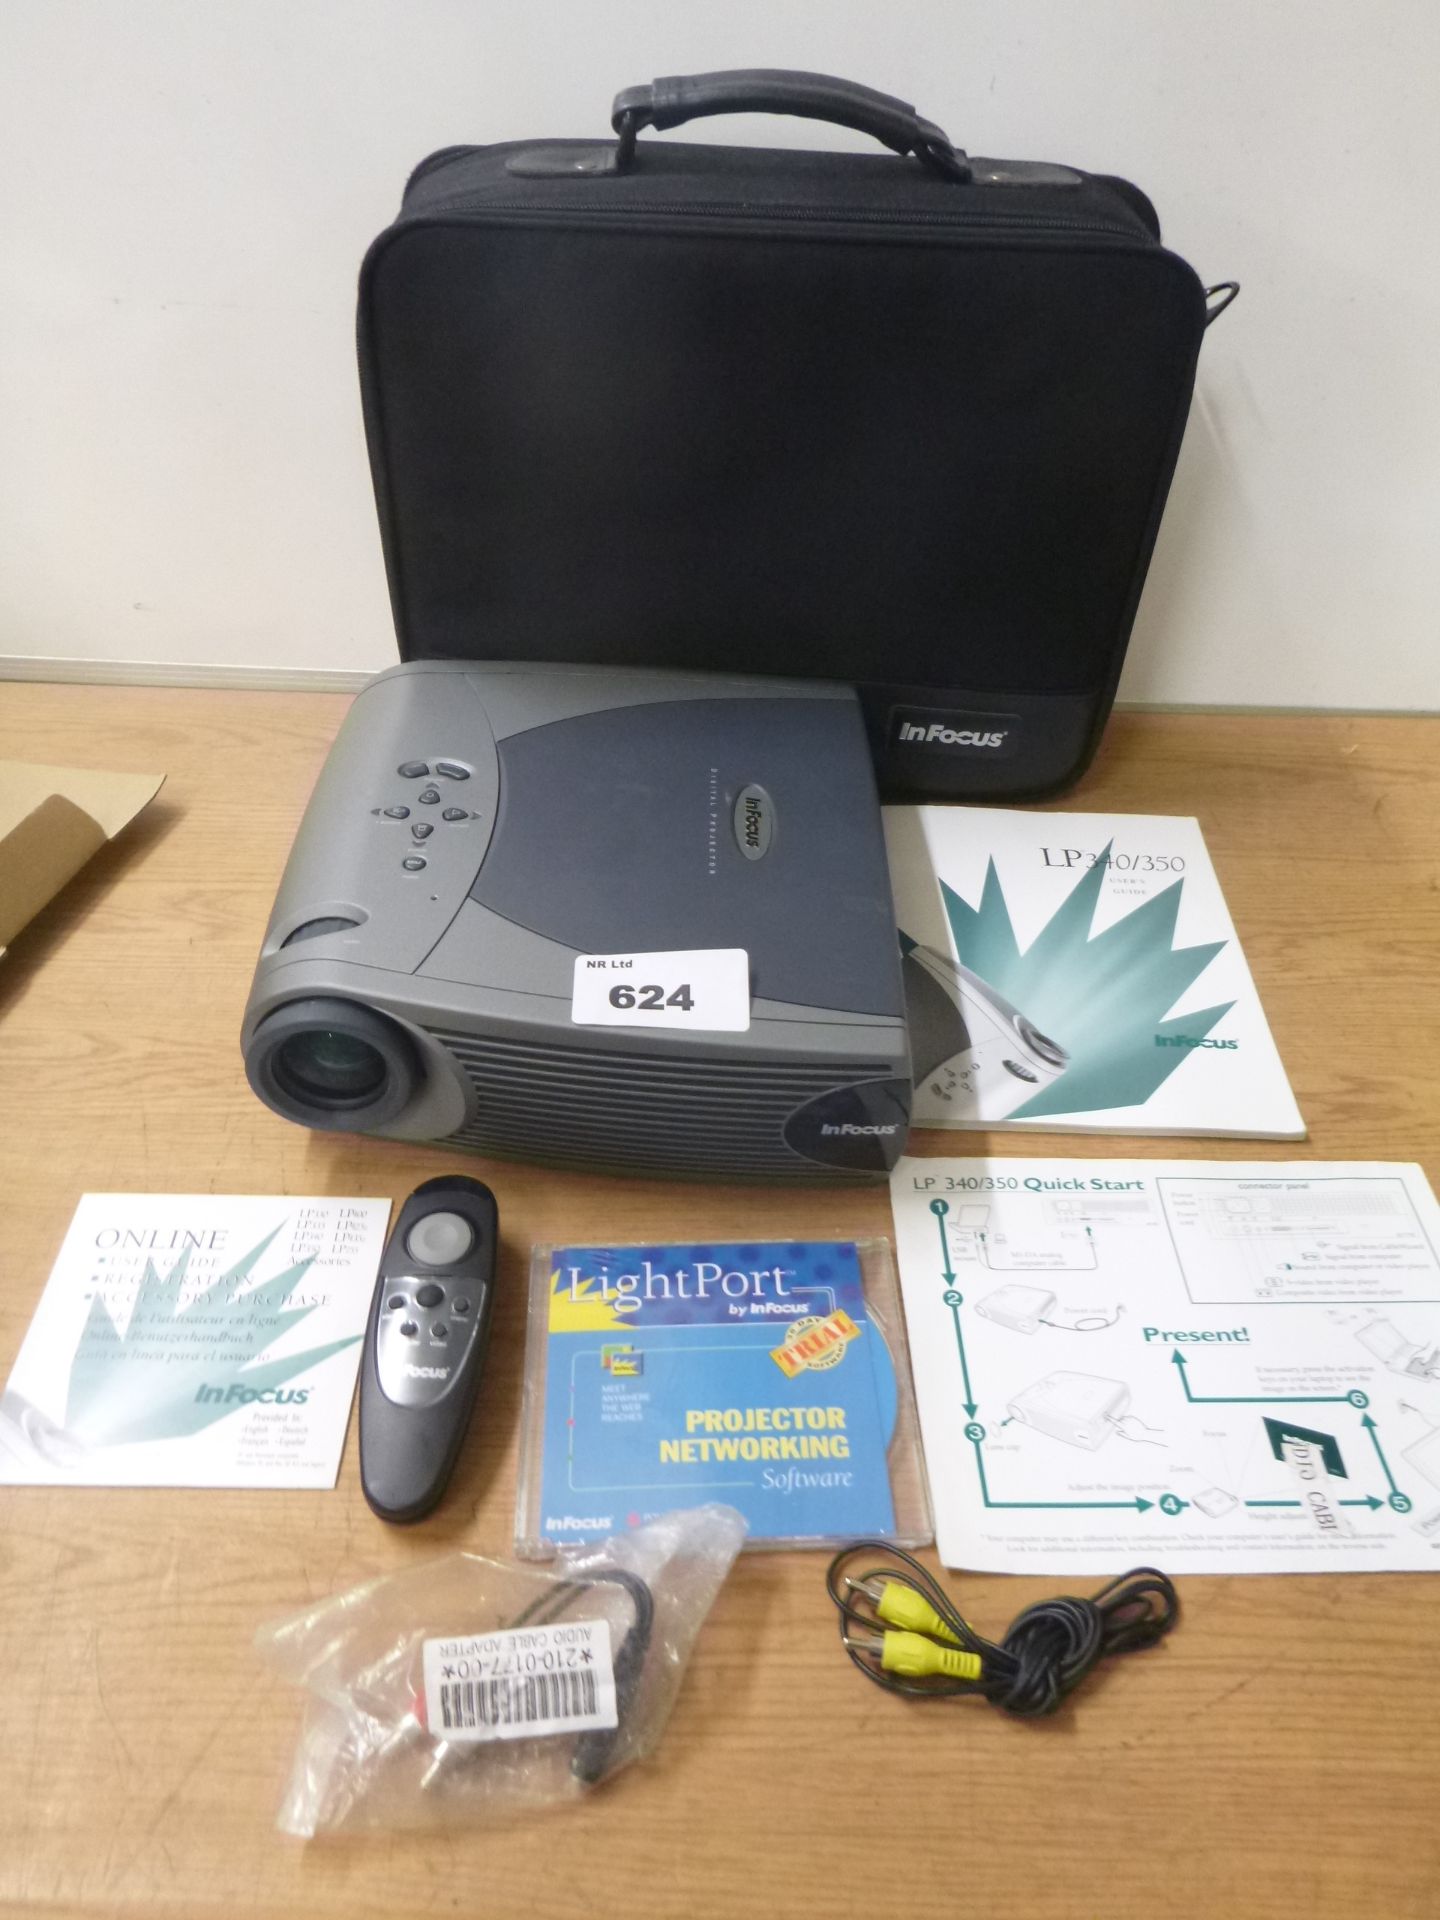 INFOCUS LP350 Projector. COMPLETE WITH CARRYCASE,REMOTE, USER GUIDE-SEE PHOTOS